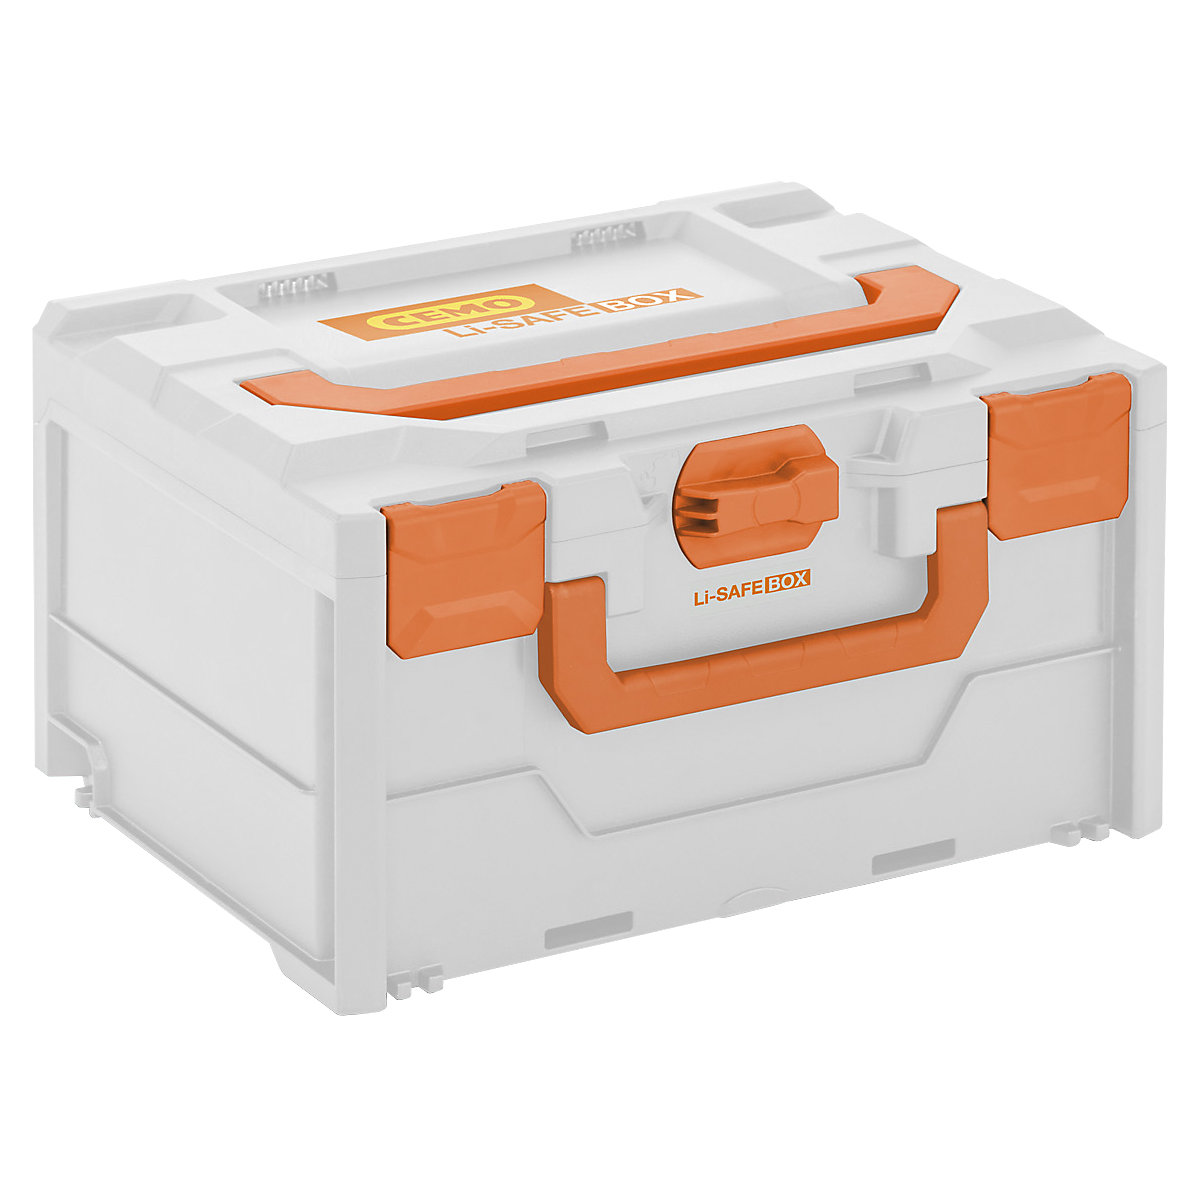 Li-SAFE modular fire protection box for rechargeable batteries – CEMO